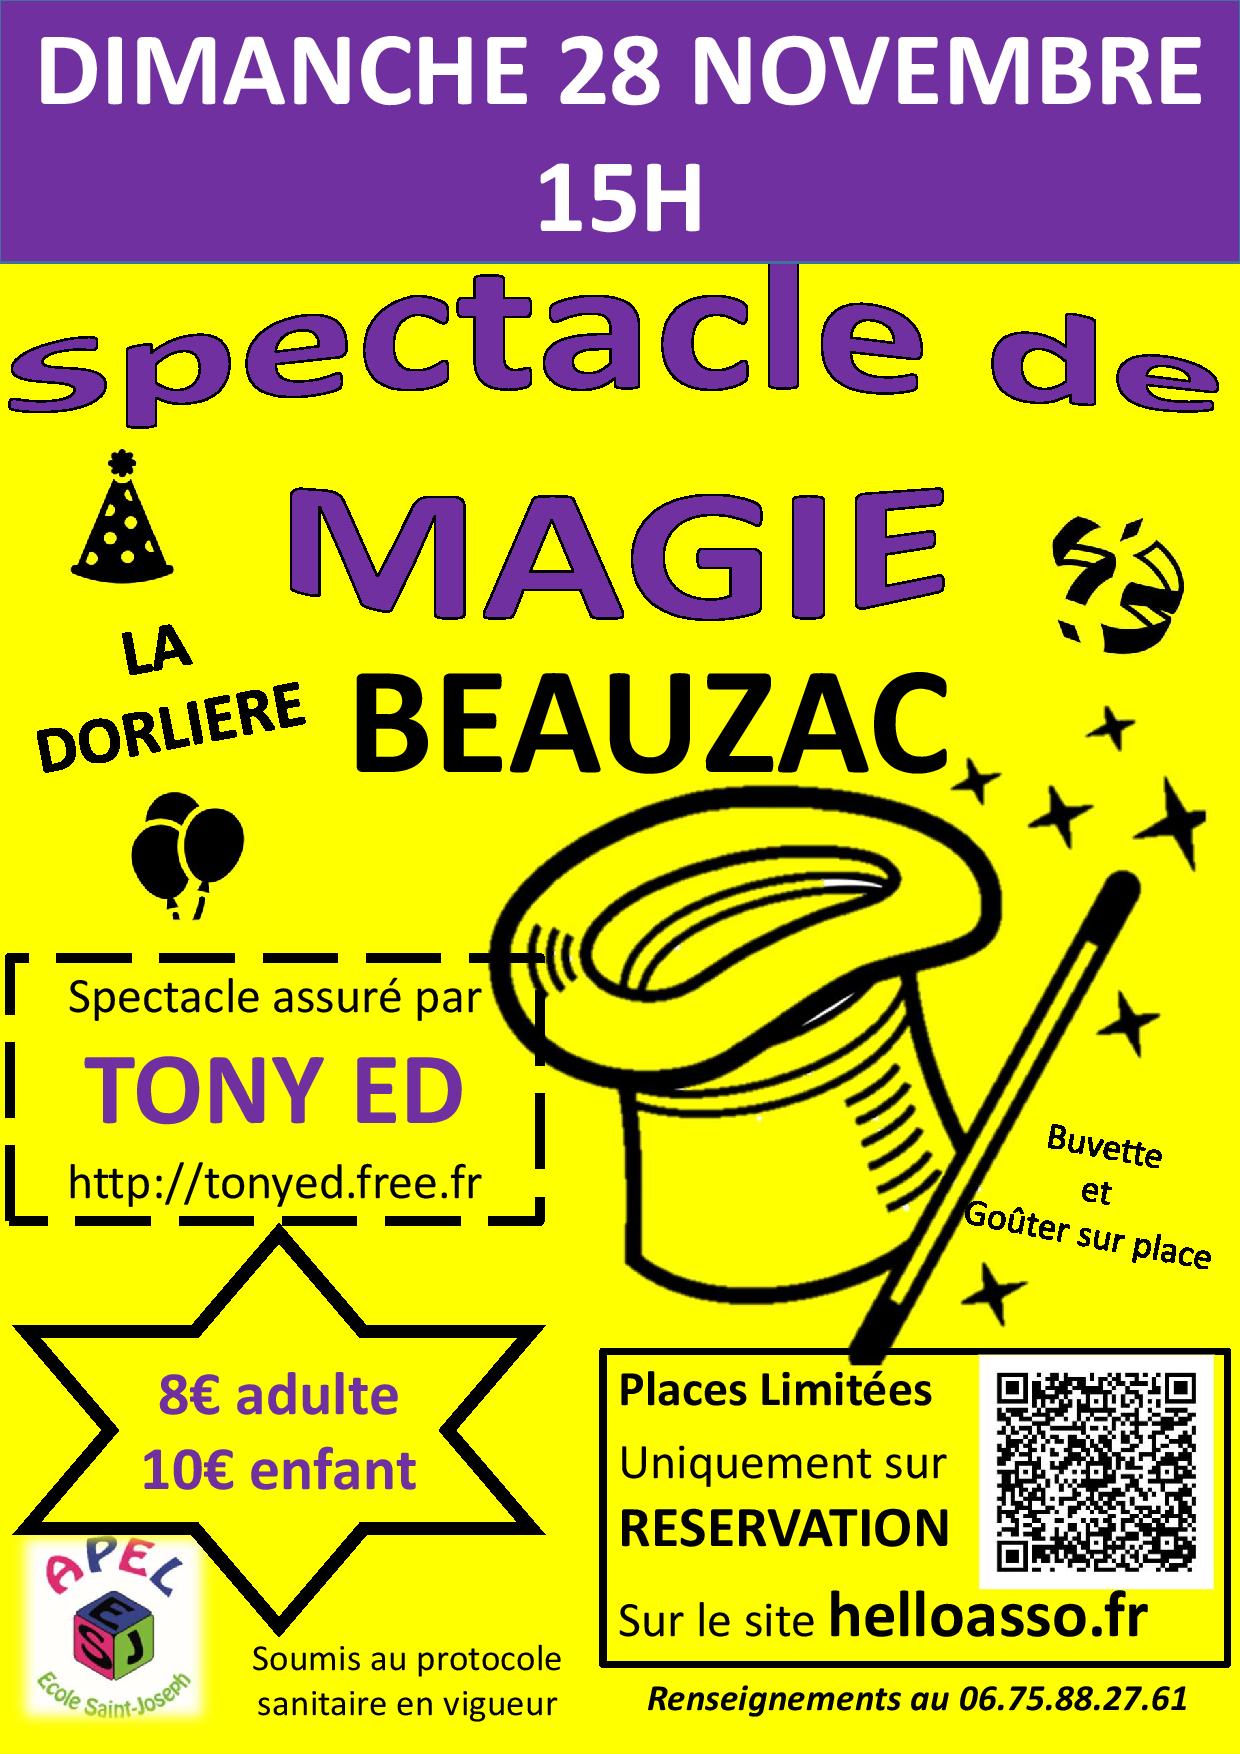 eve_spectaclemagie_beauzac